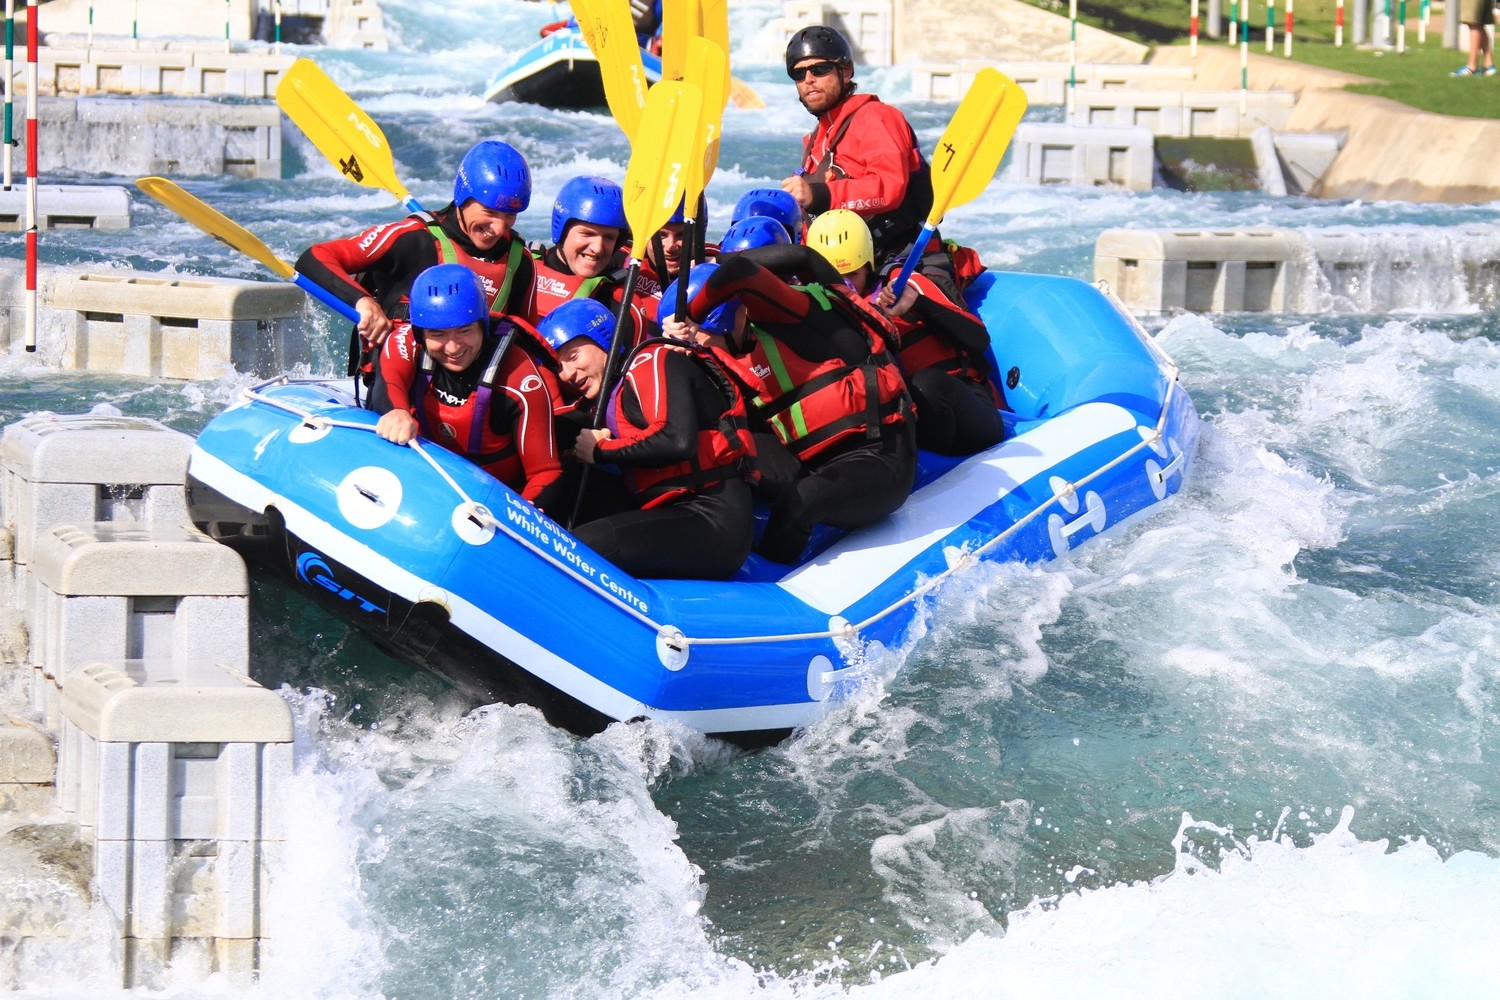 DEPOSIT: EXCLUSIVE WHITE WATER RAFTING SESSION WITH GB GOLD MEDALIST For 8 people